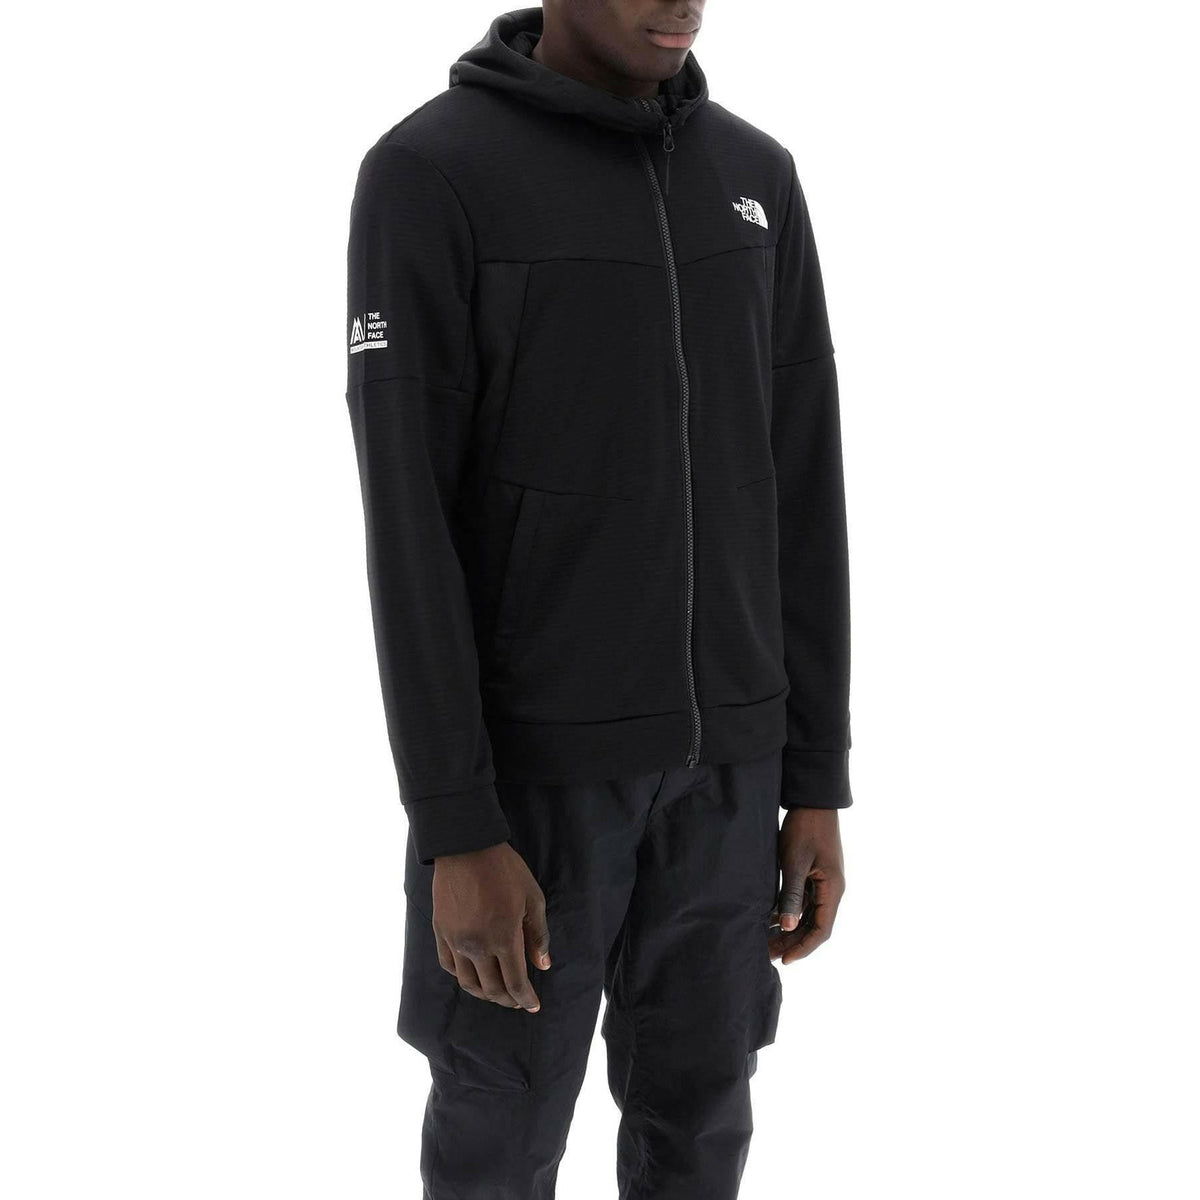 THE NORTH FACE - The North Face Black Logo Embroidered Zip-Up Hoodie - JOHN JULIA